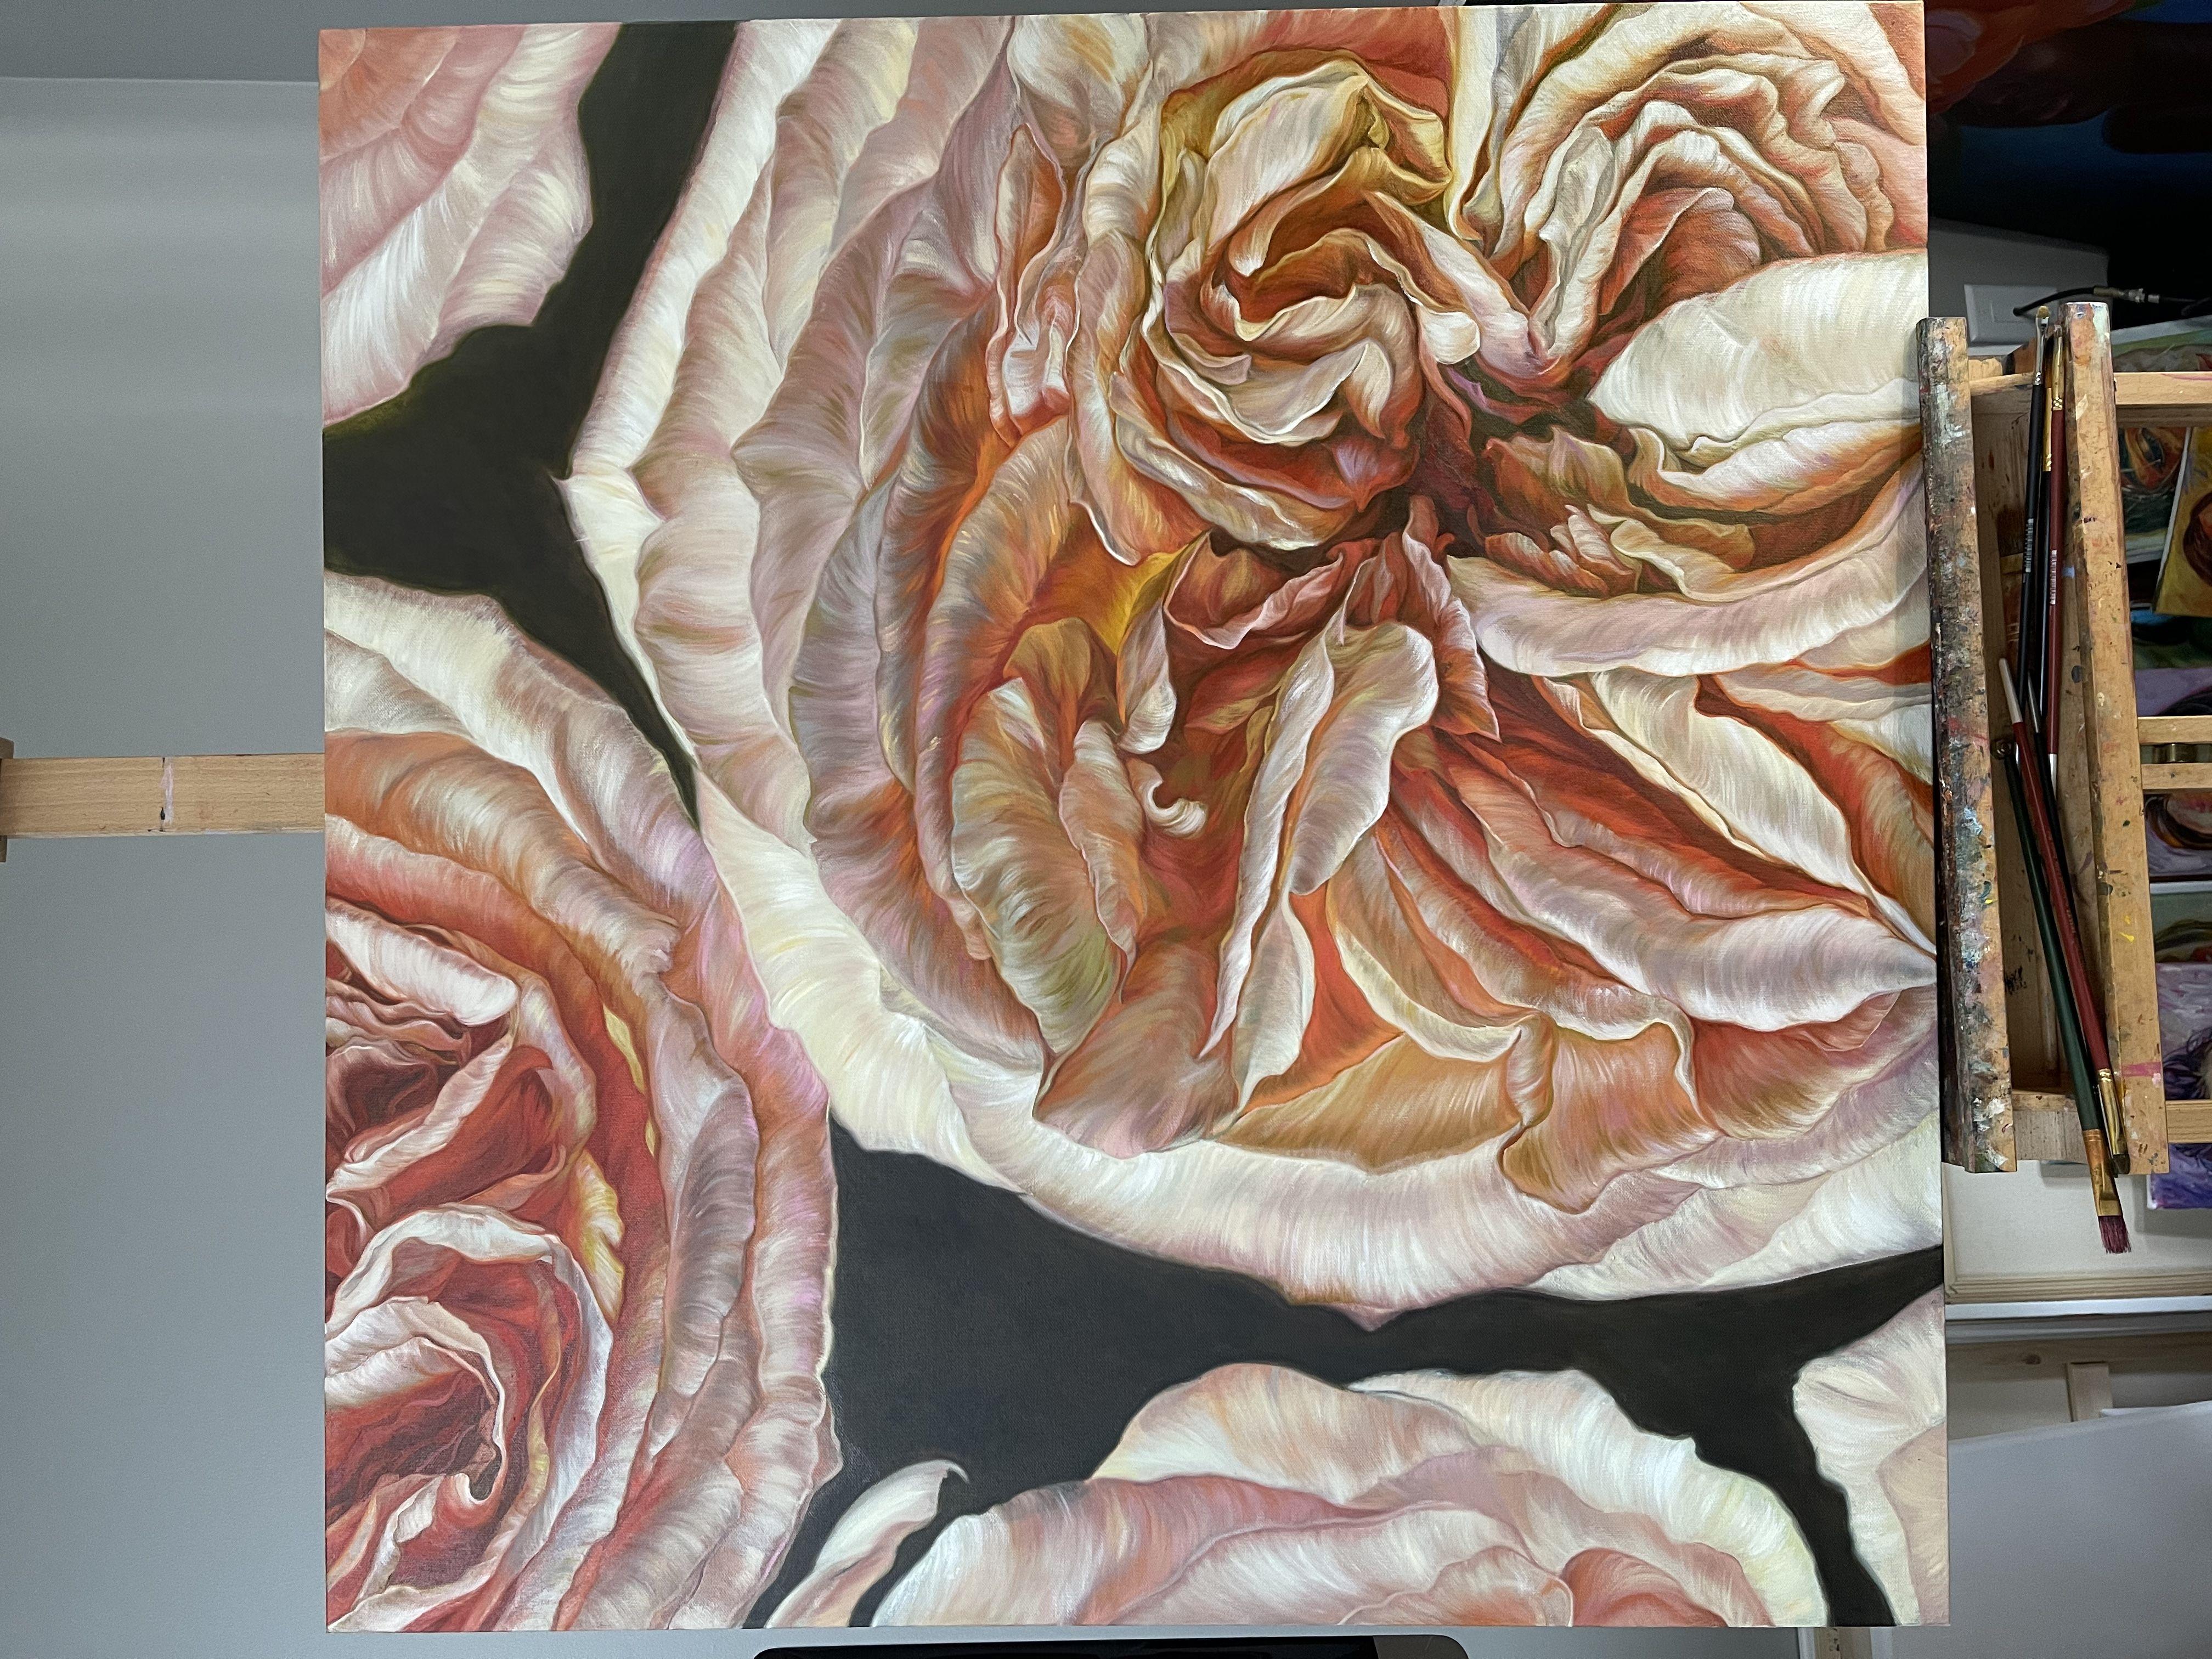 Peony roses, Painting, Oil on Canvas